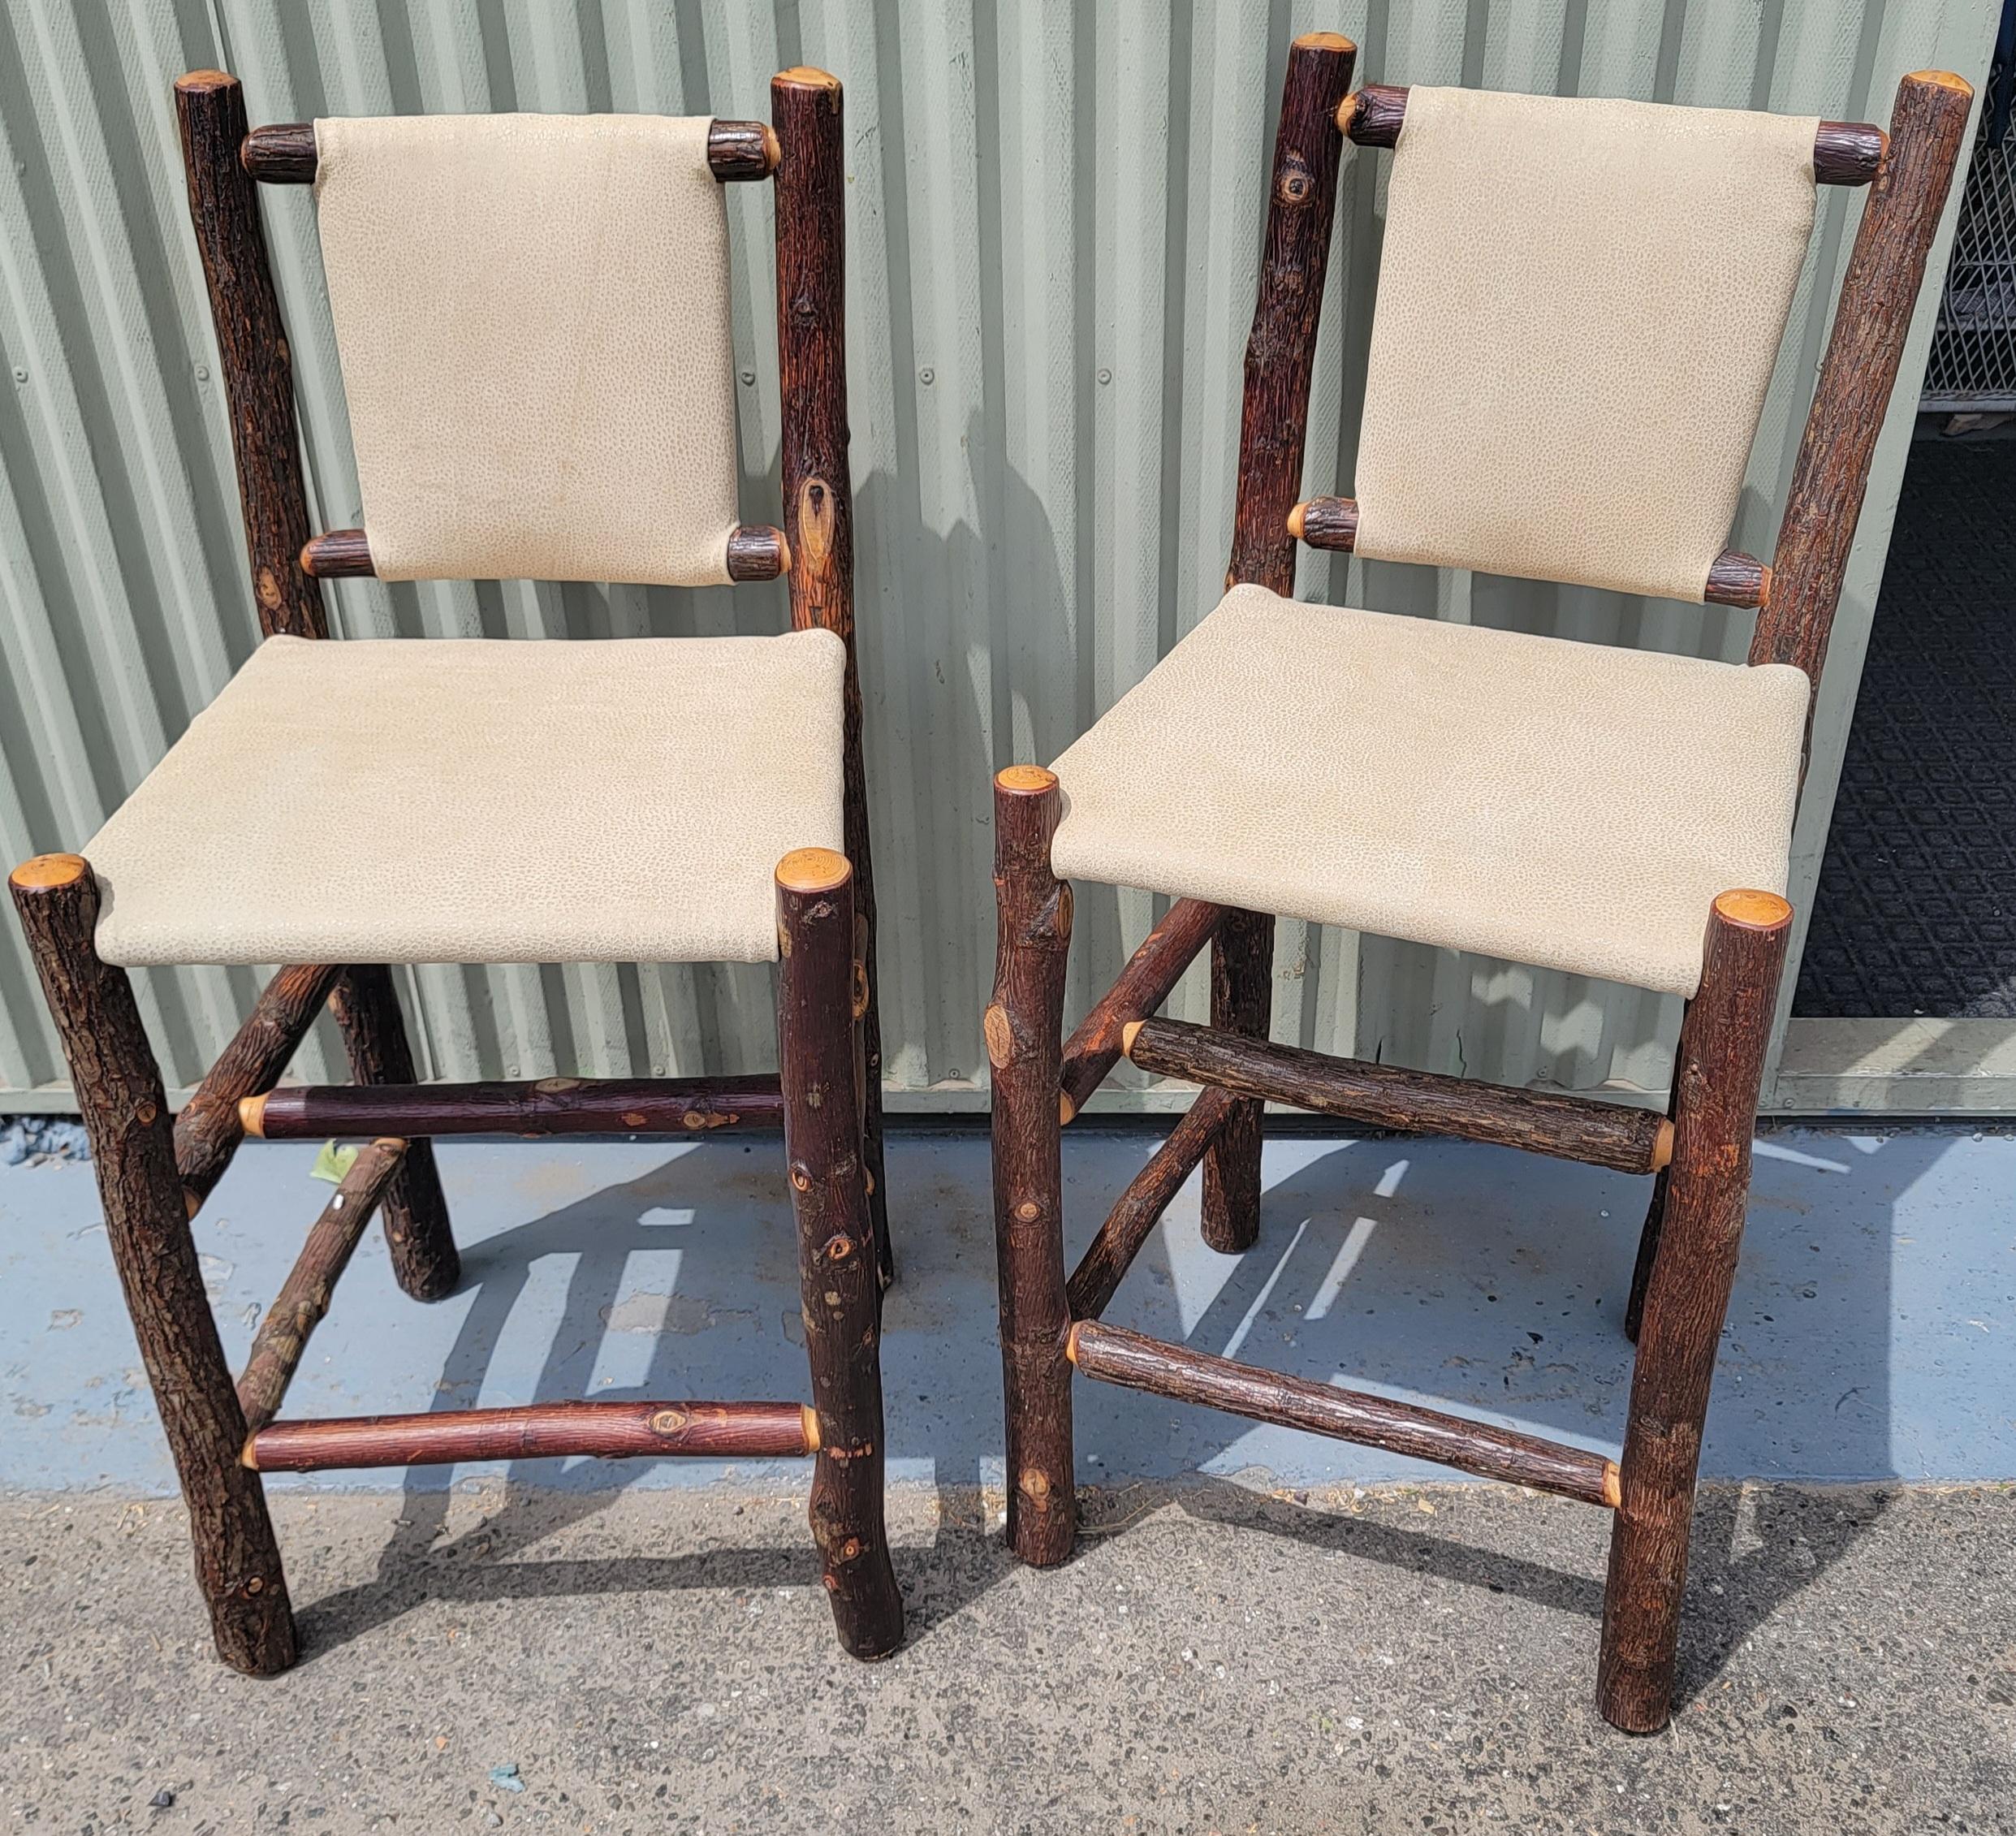 Cuir Rare Old Hickory Bar Stools W/ Leather Seats & Backs-Pair en vente